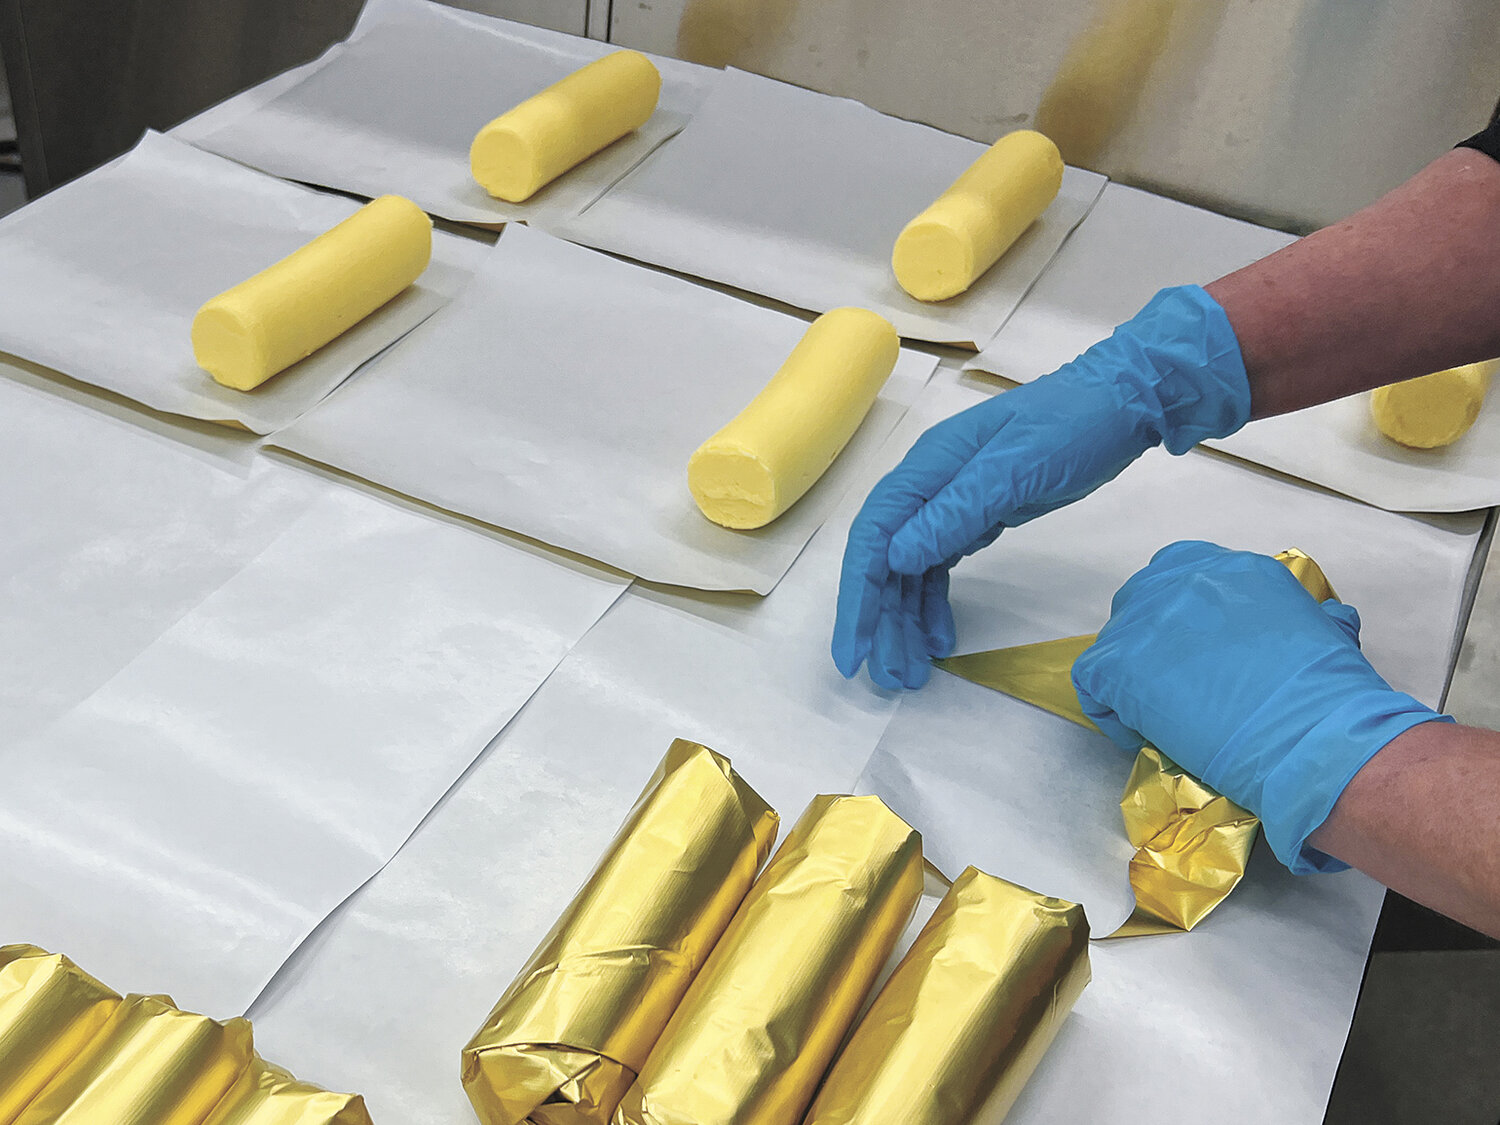 Julie Orchard packages butter in March at Royal Guernsey Creamery near Columbus, Wisconsin. Every roll of butter is hand wrapped in gold foil, and some days, the Orchards package 1,000 rolls of butter.